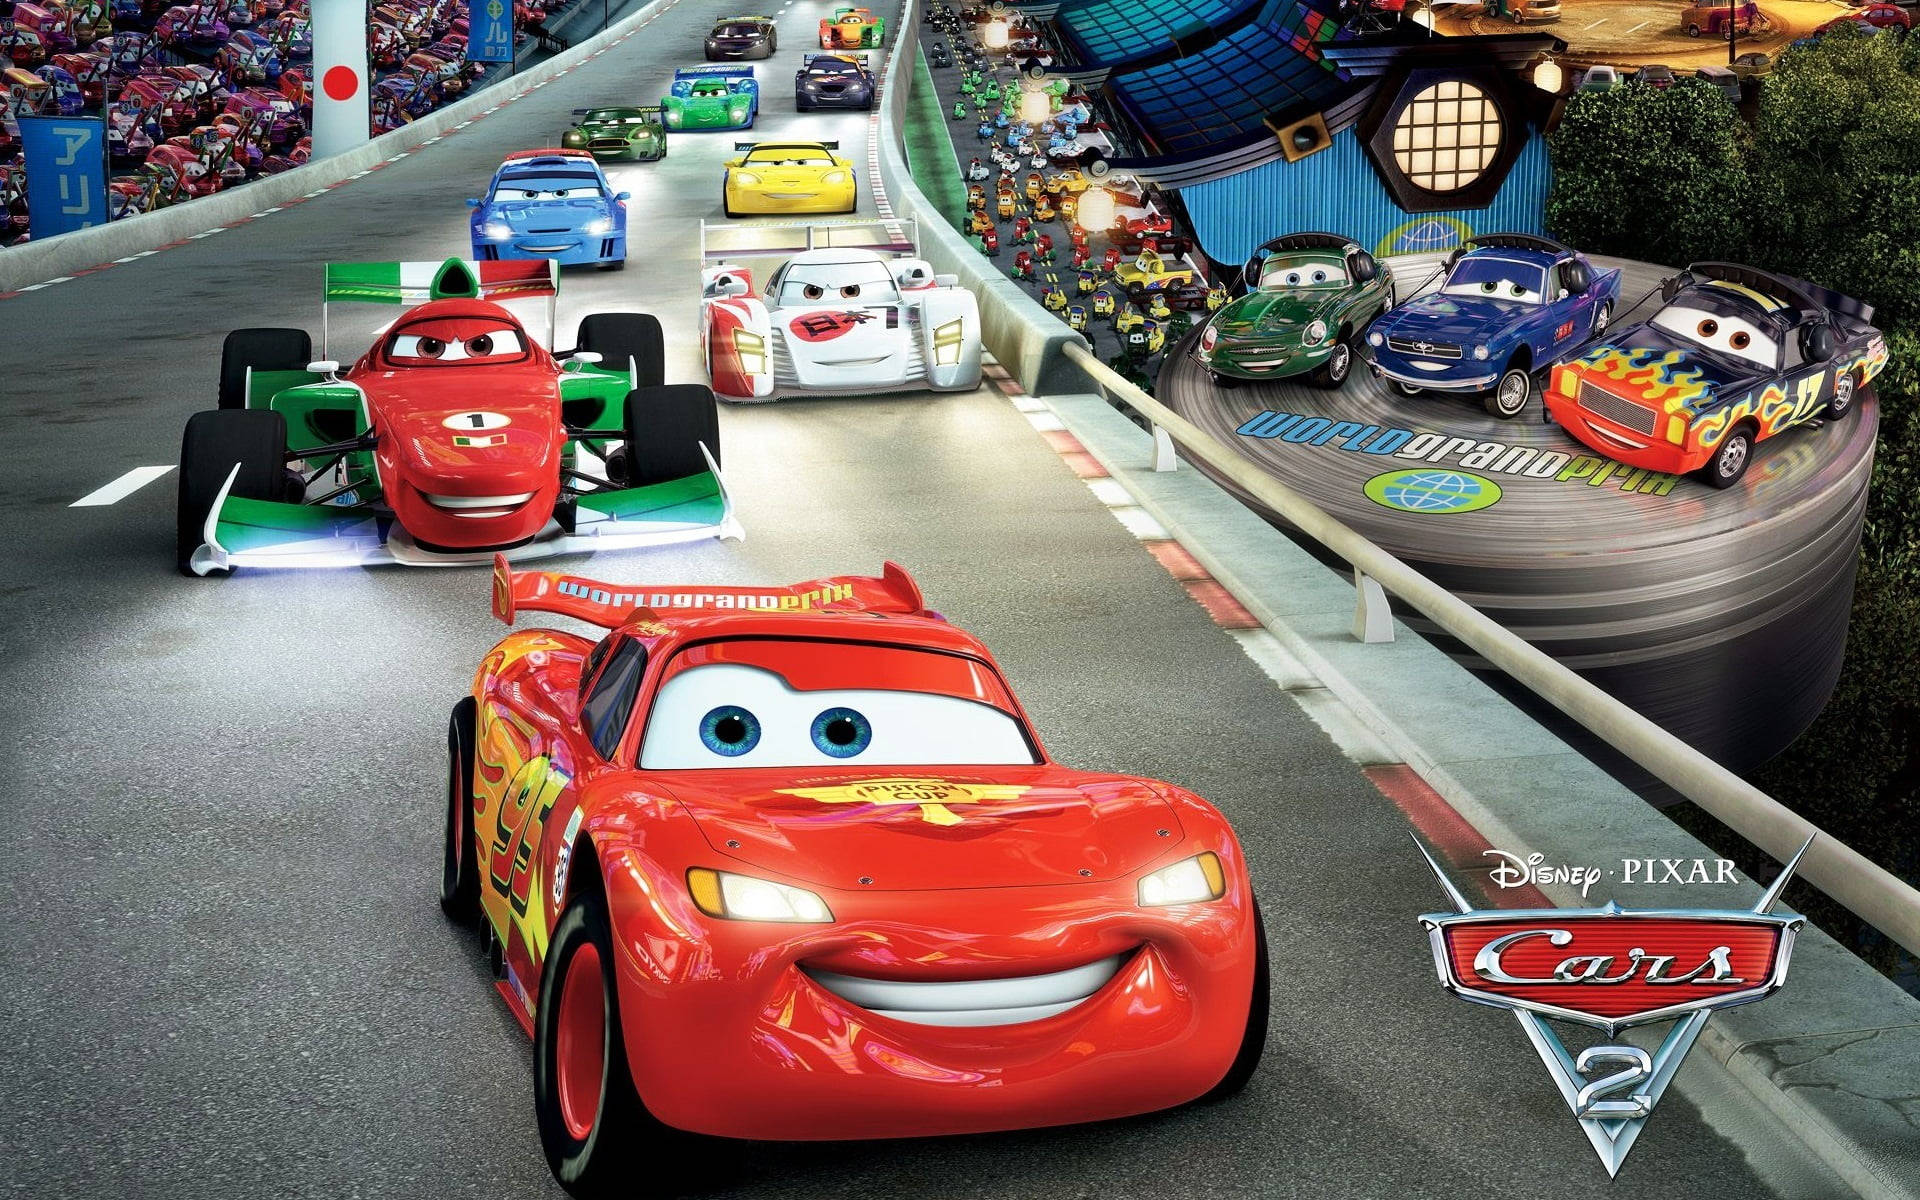 Exciting Line-up of Racers at the World Grand Prix in Cars 2 Wallpaper